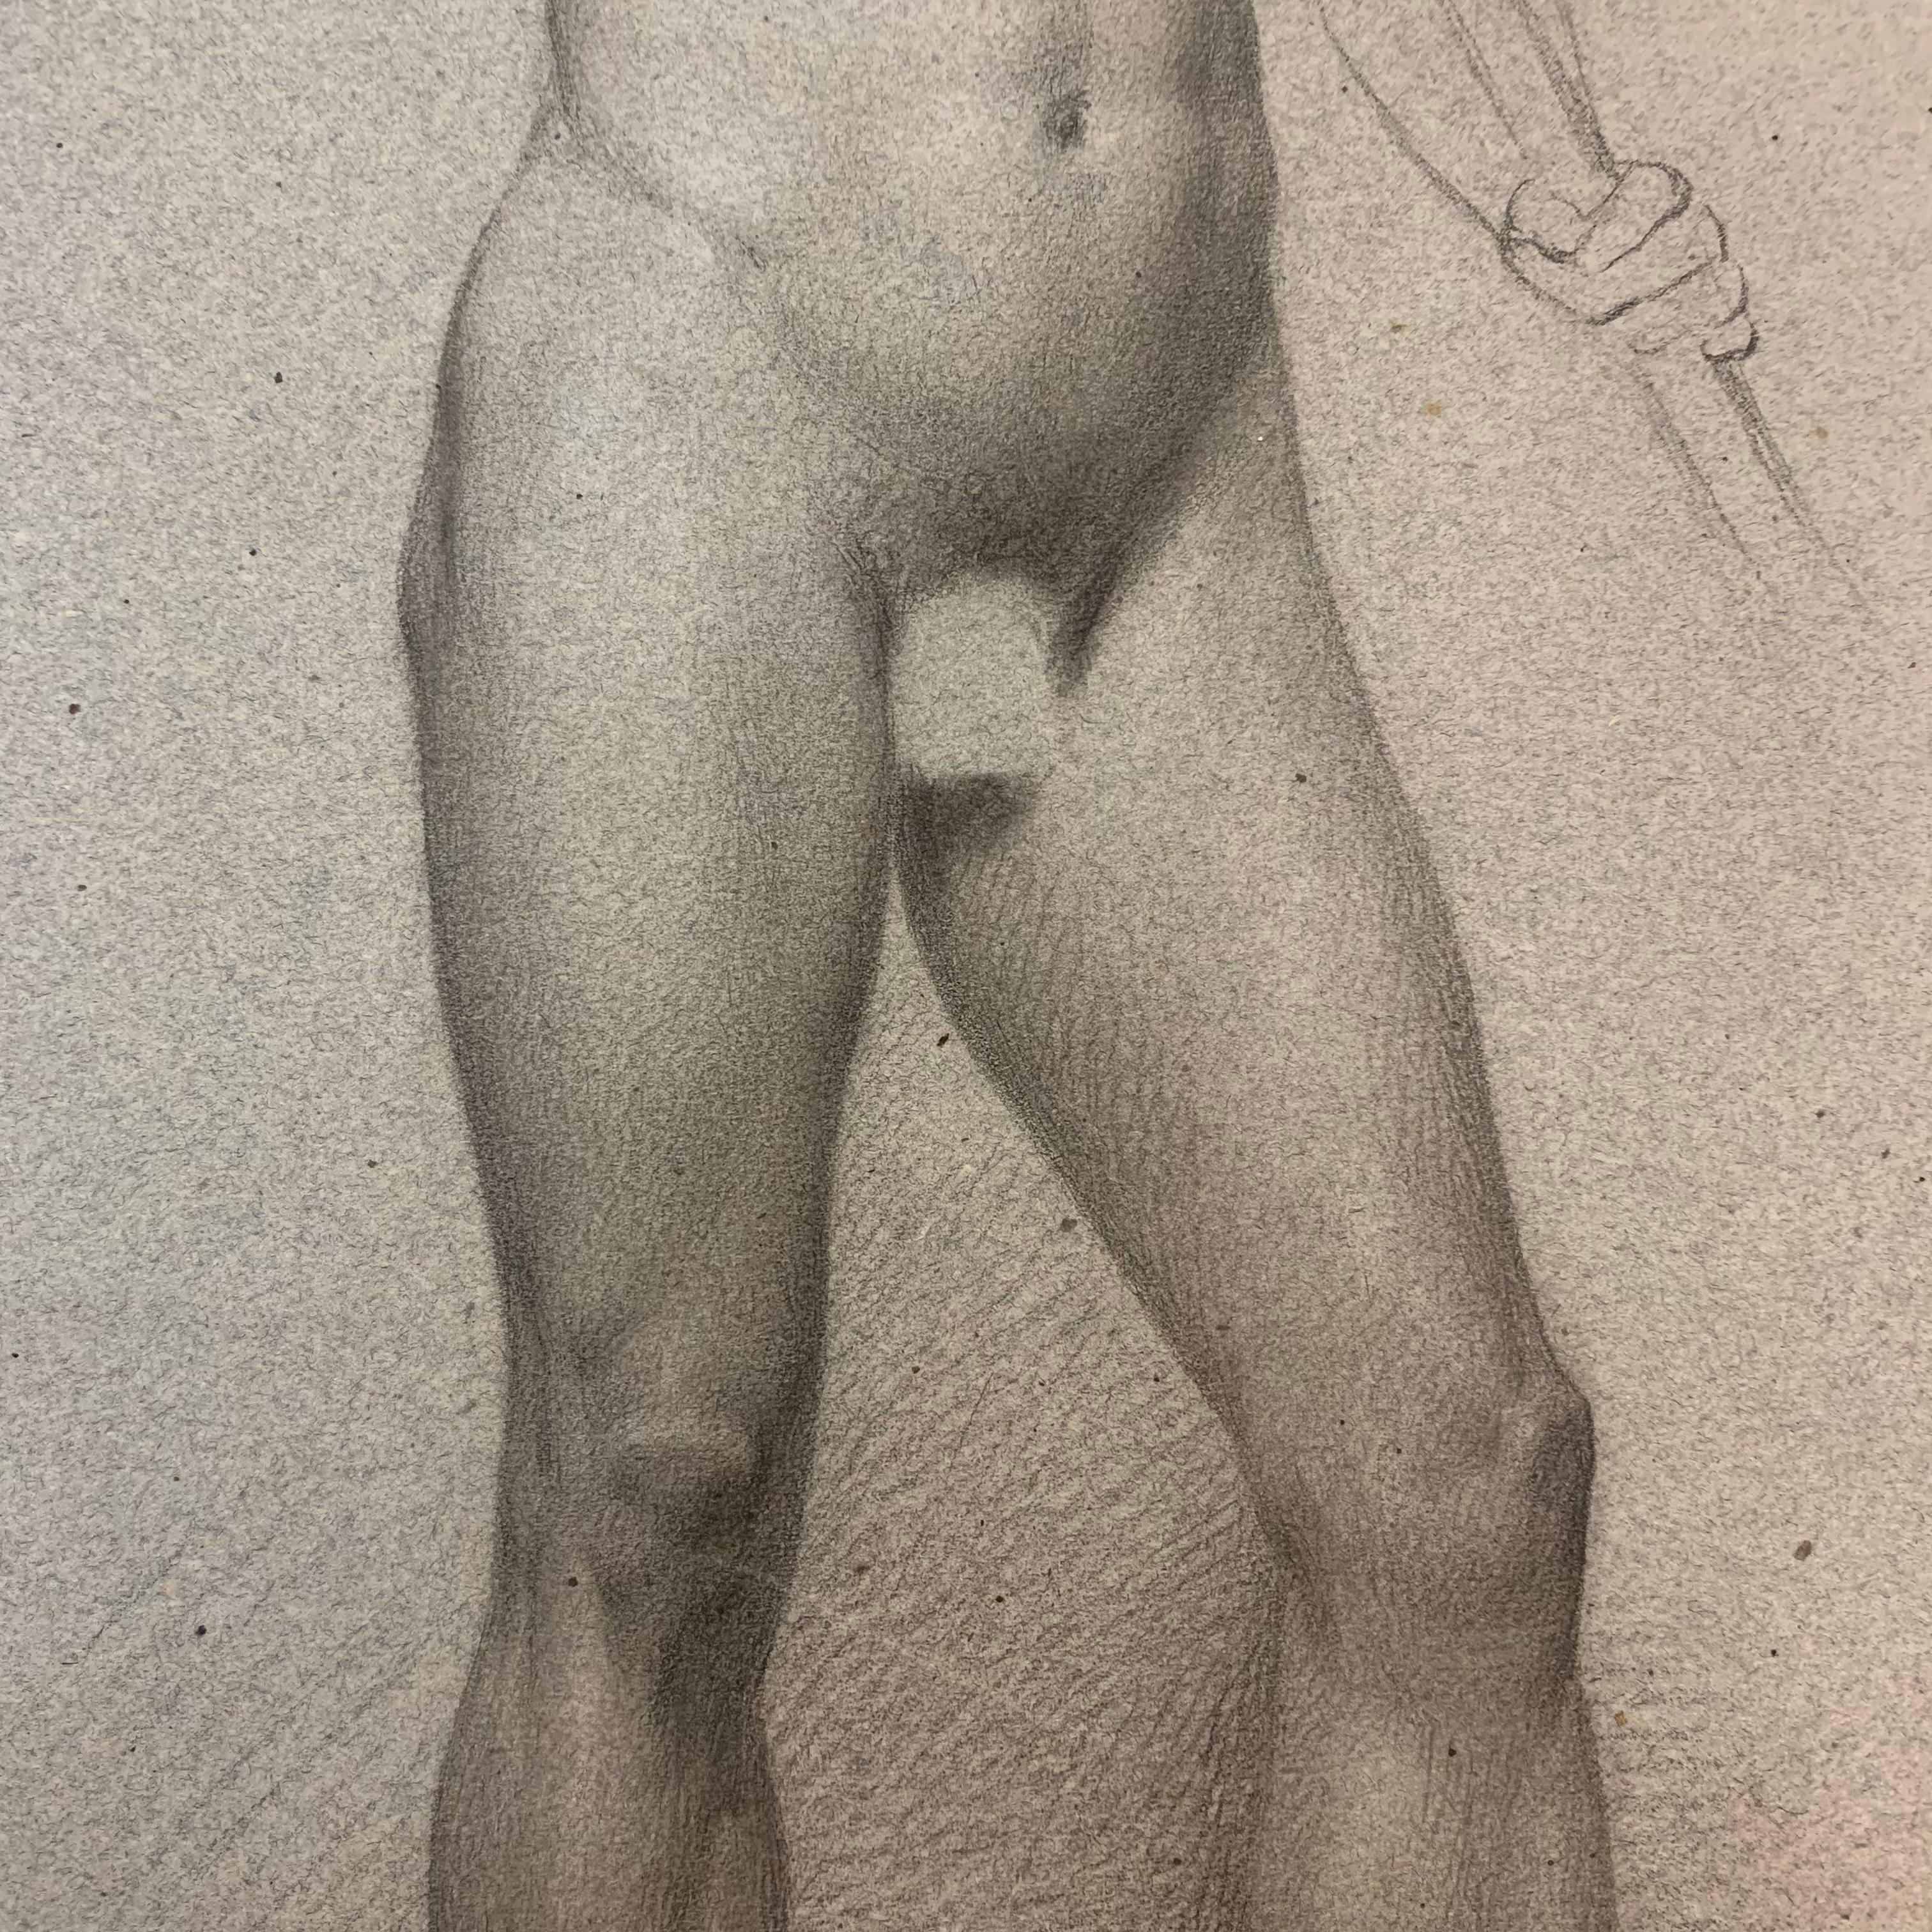 Accademic Study of Male Nude Soldier with Spear.  XIX Century 2